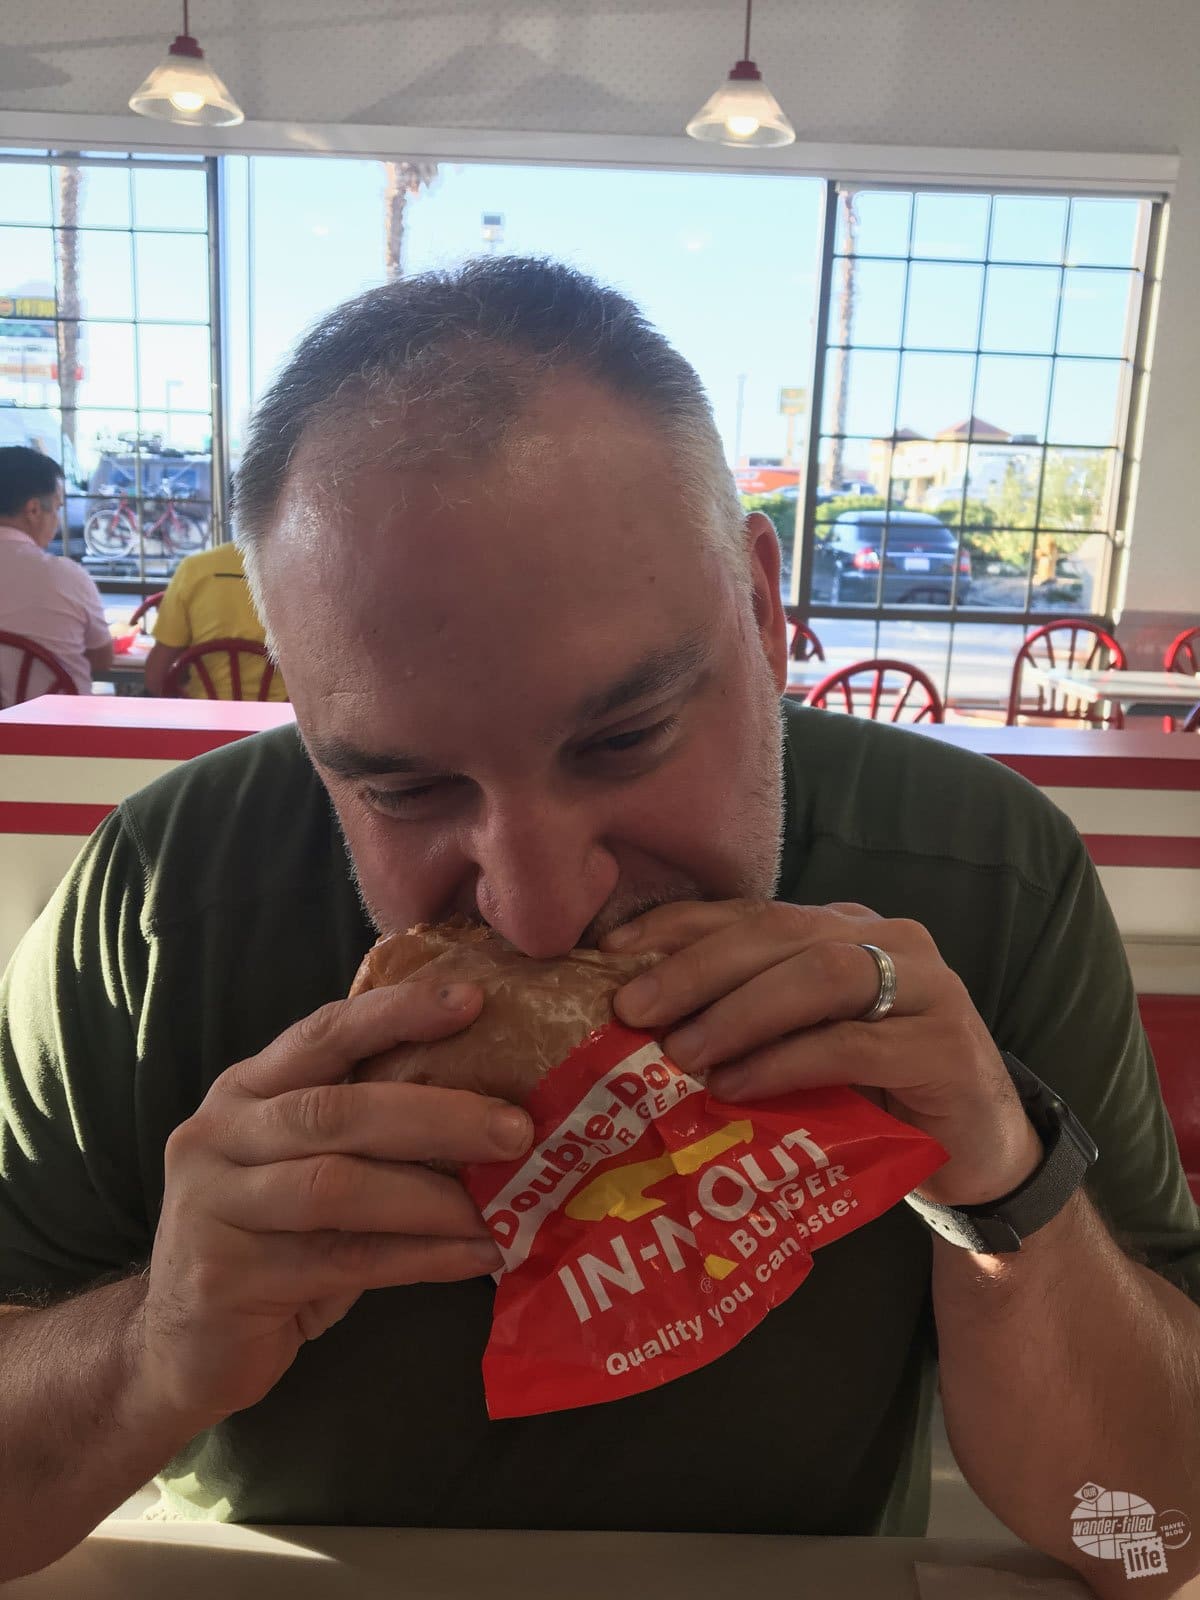 Grant biting into his first In-N-Out burger.